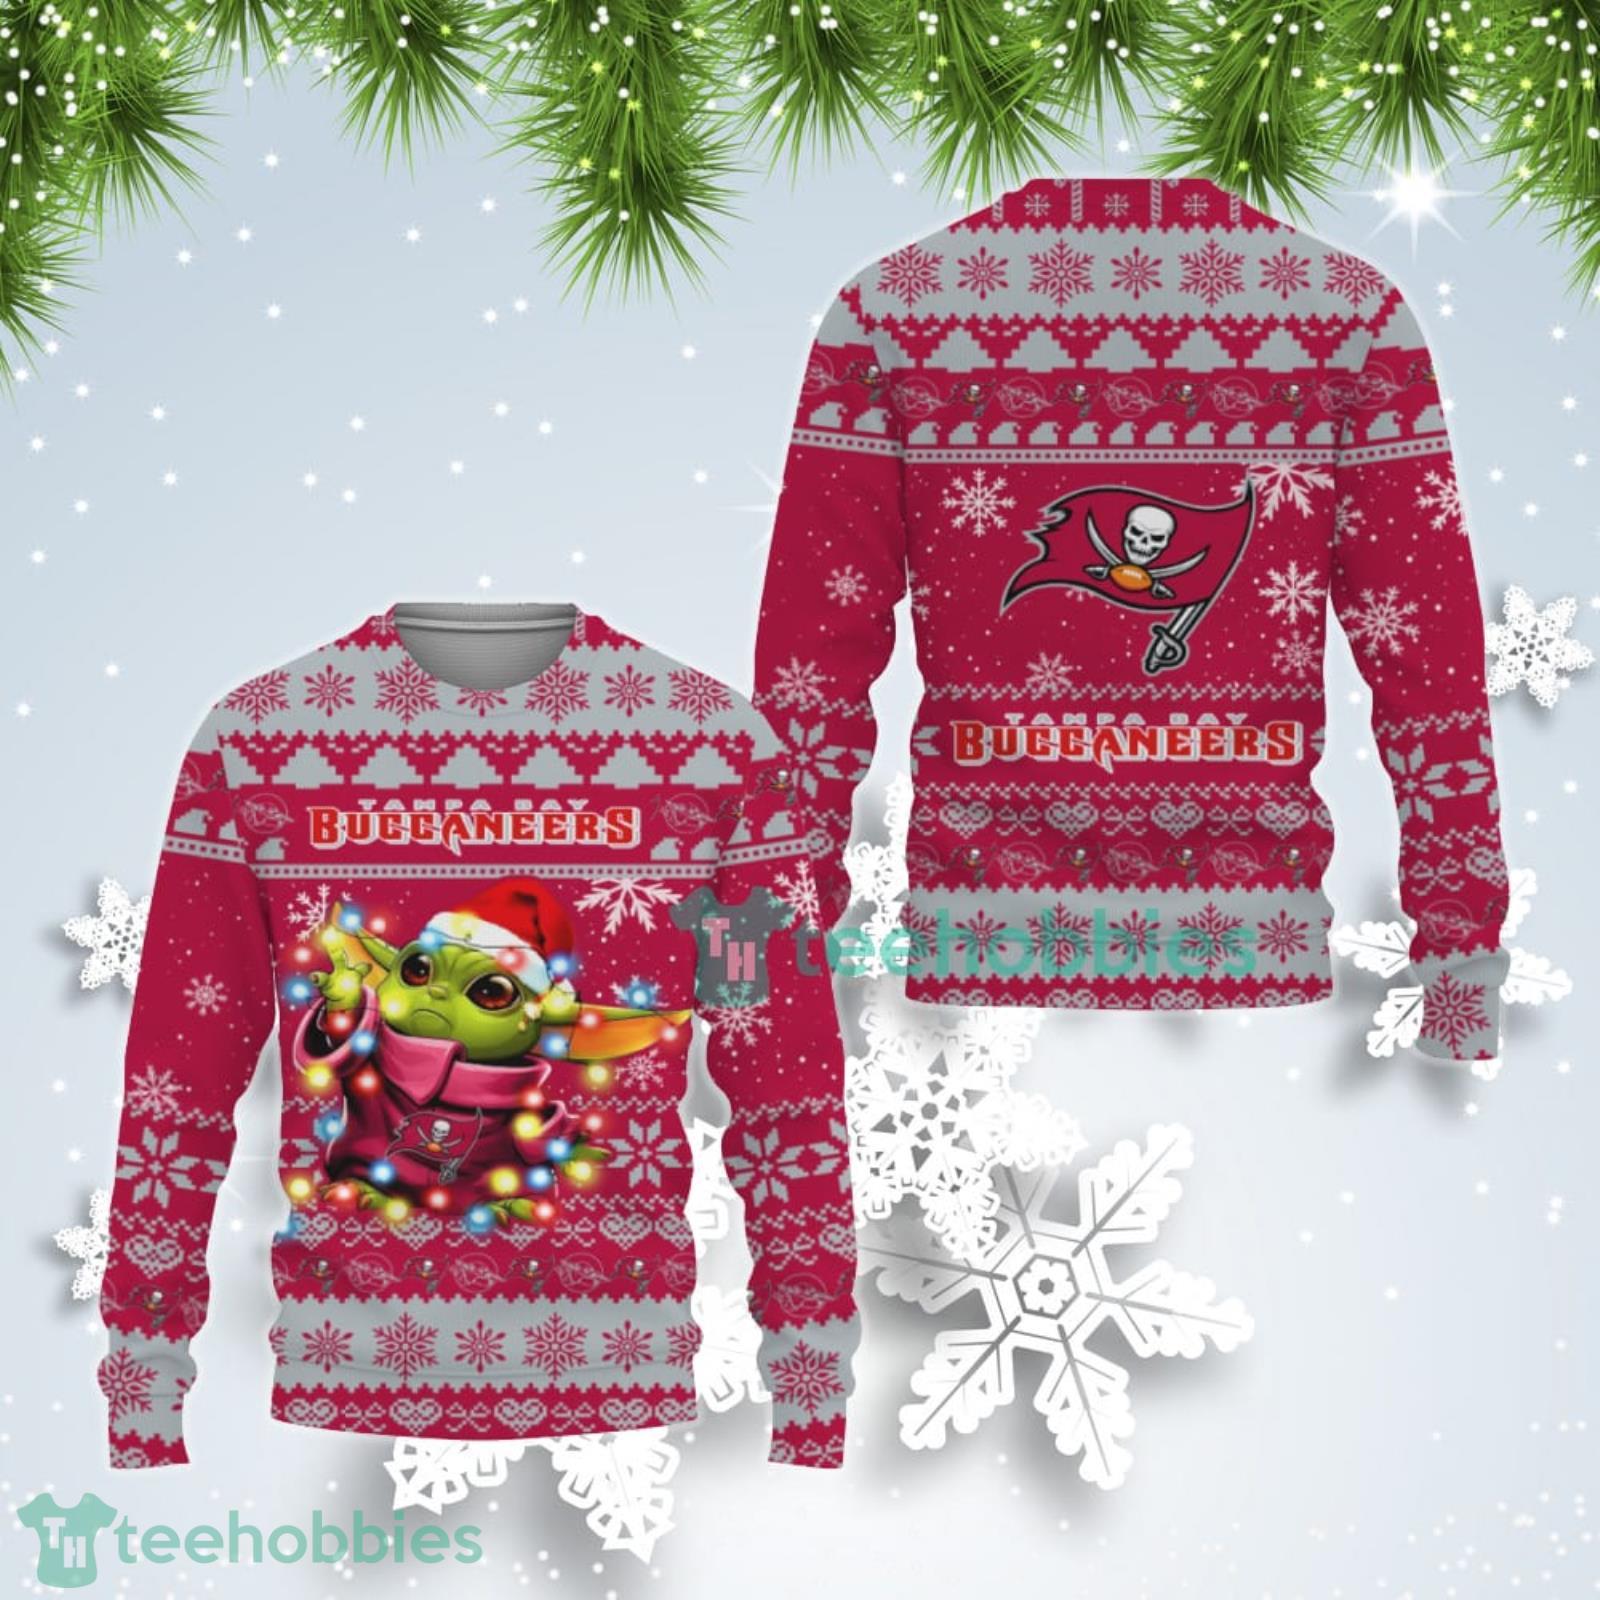 Tampa Bay Buccaneers Cute Baby Yoda Star Wars Ugly Christmas Sweater Product Photo 1